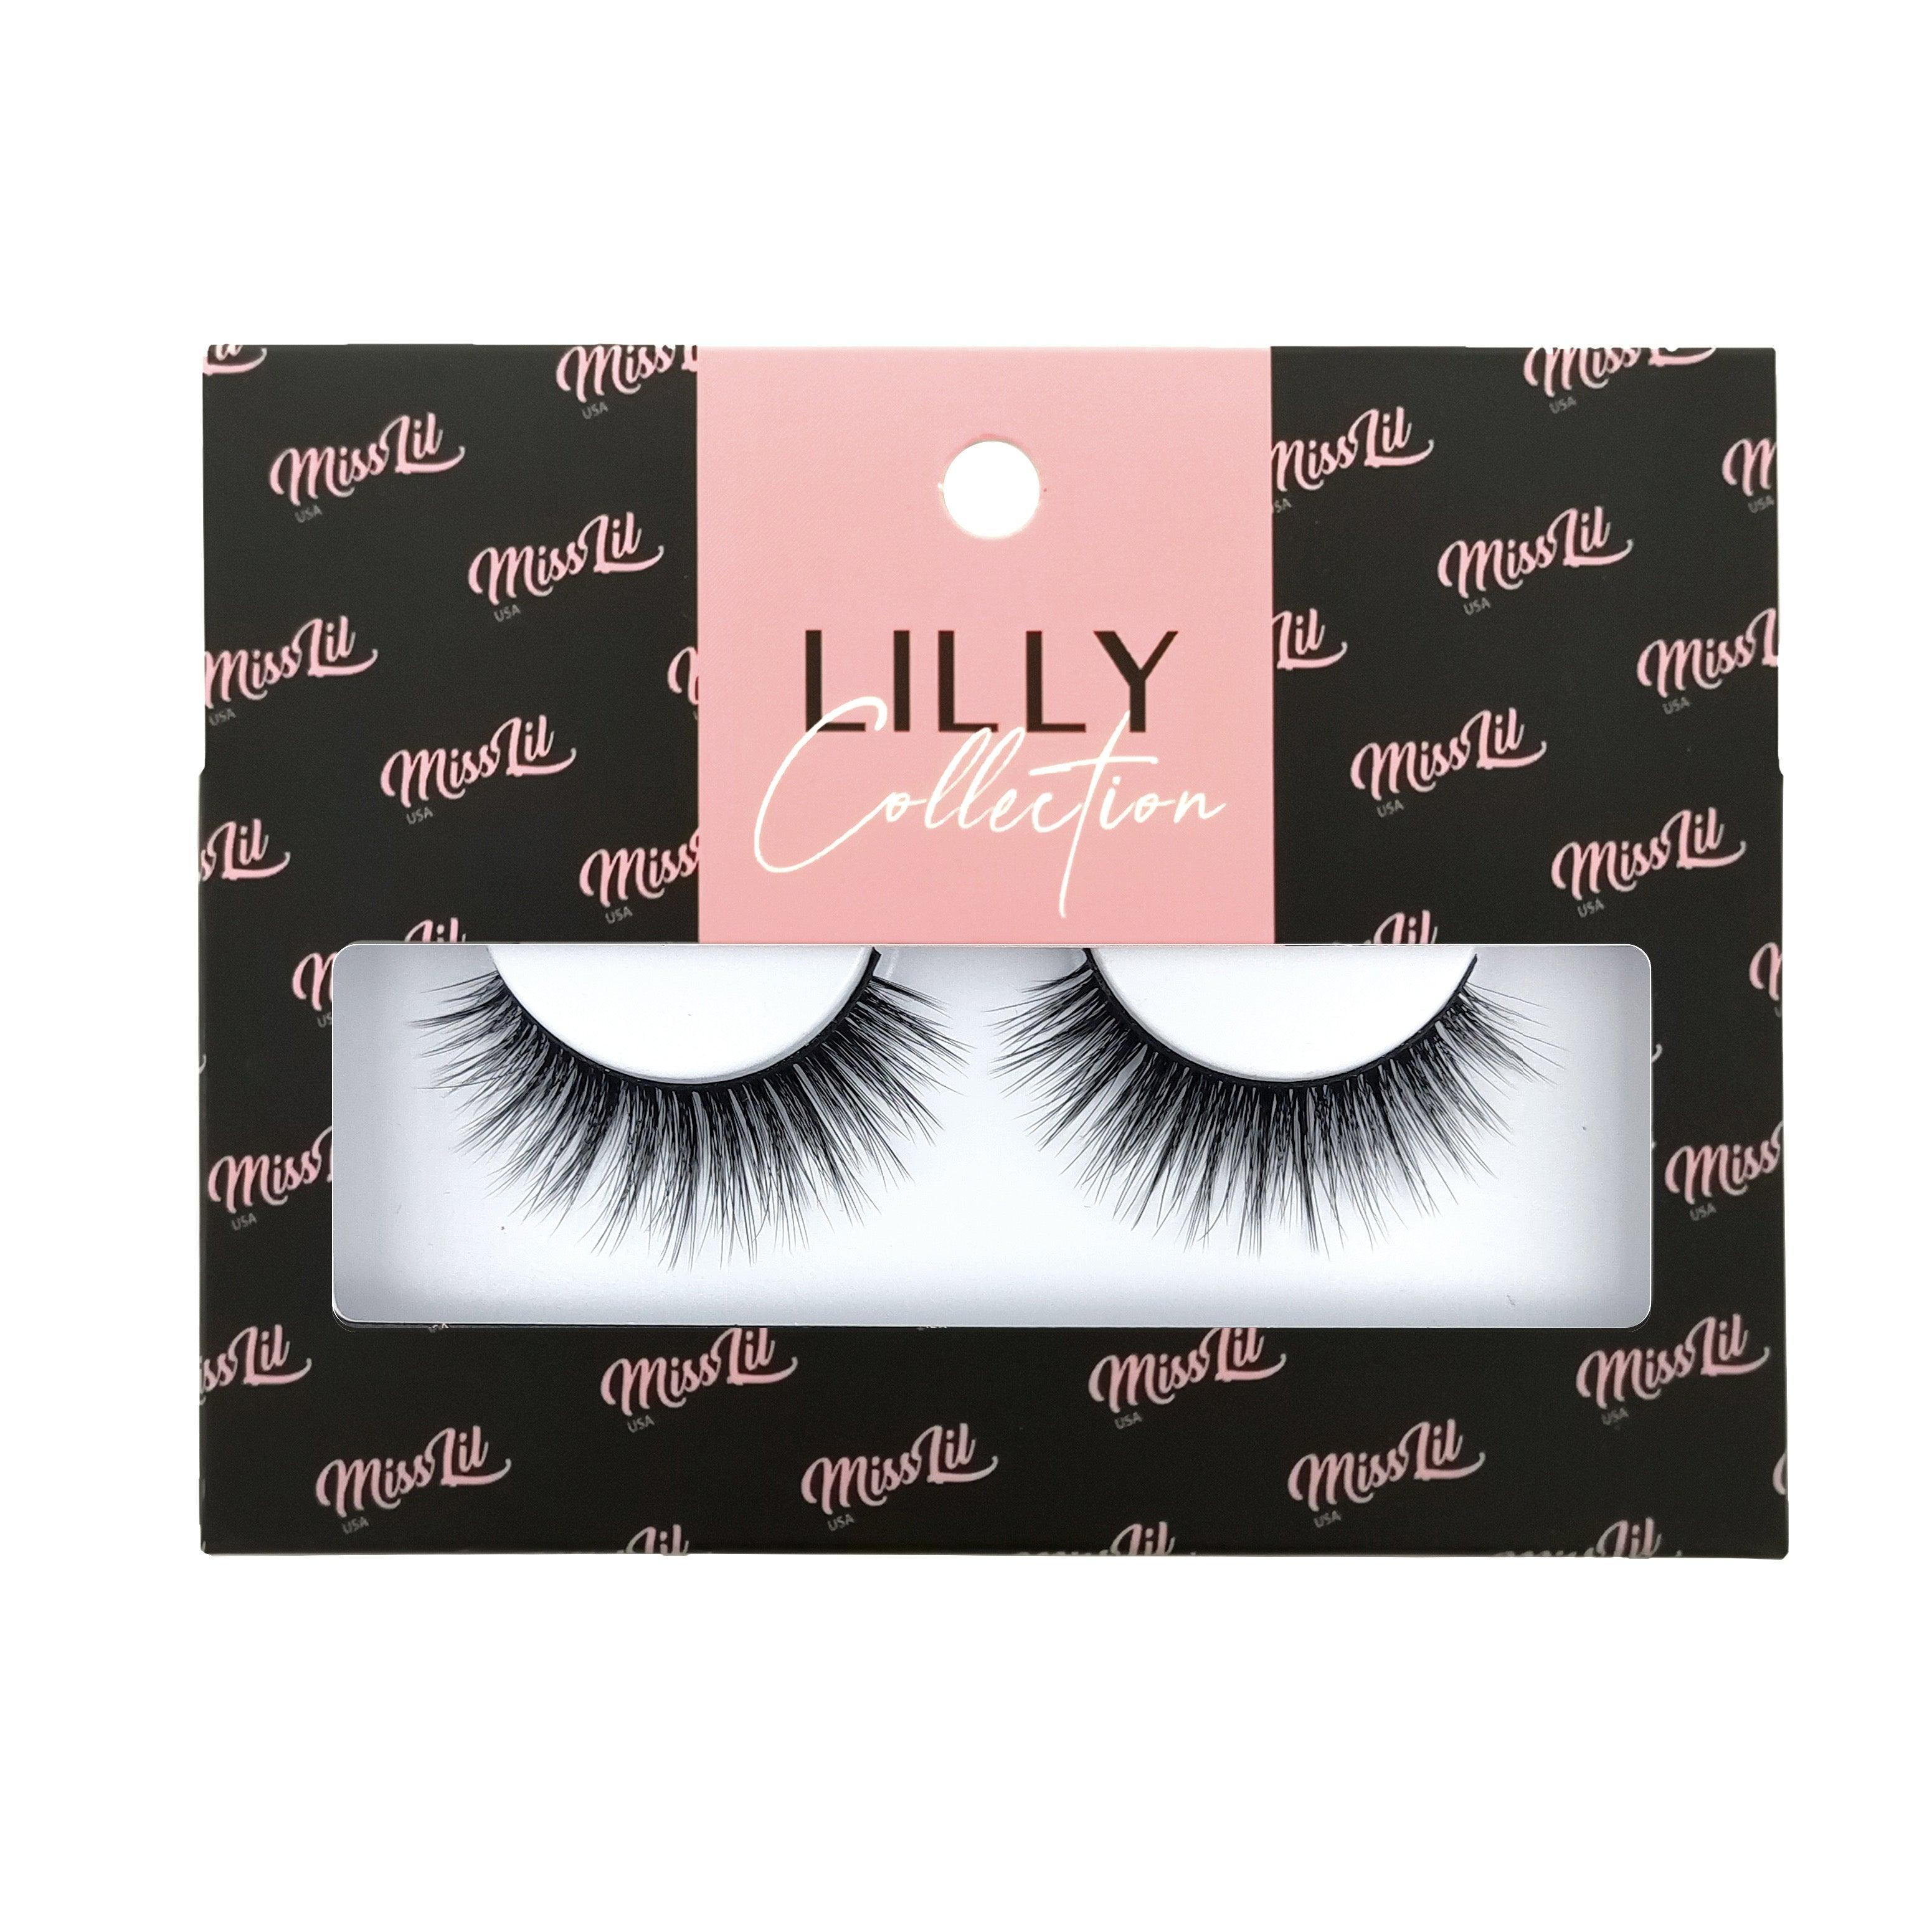 1-Pair Lashes-Lilly Collection #7 (Pack of 12) - Miss Lil USA Wholesale